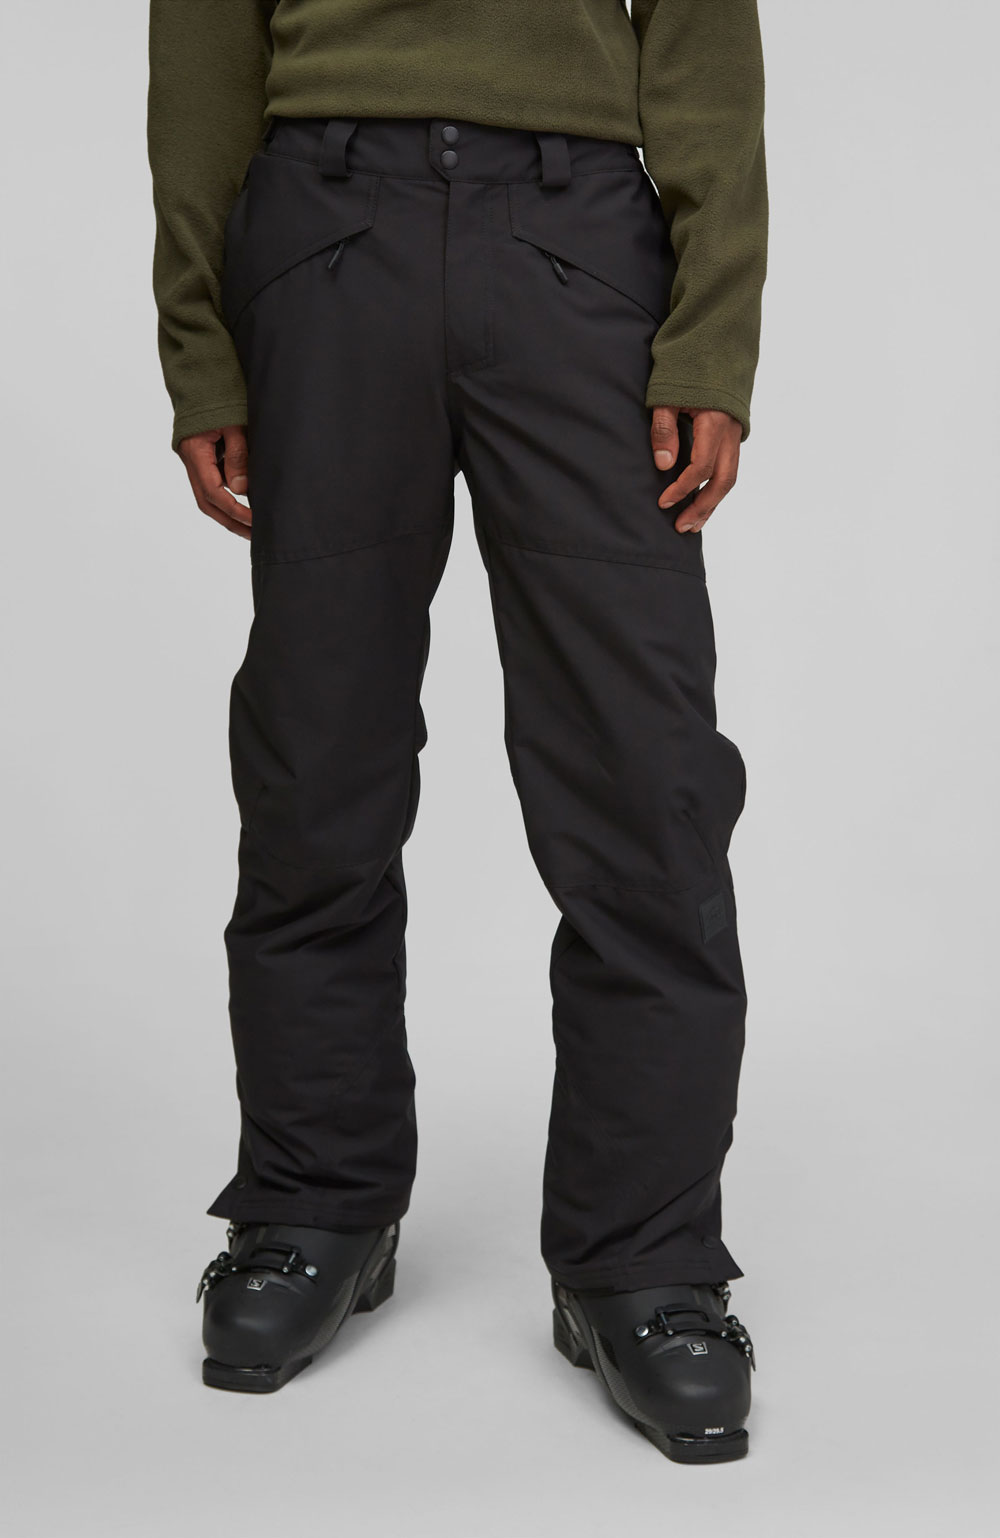 The North Face Freedom Ski Pants - Waterproof, Insulated